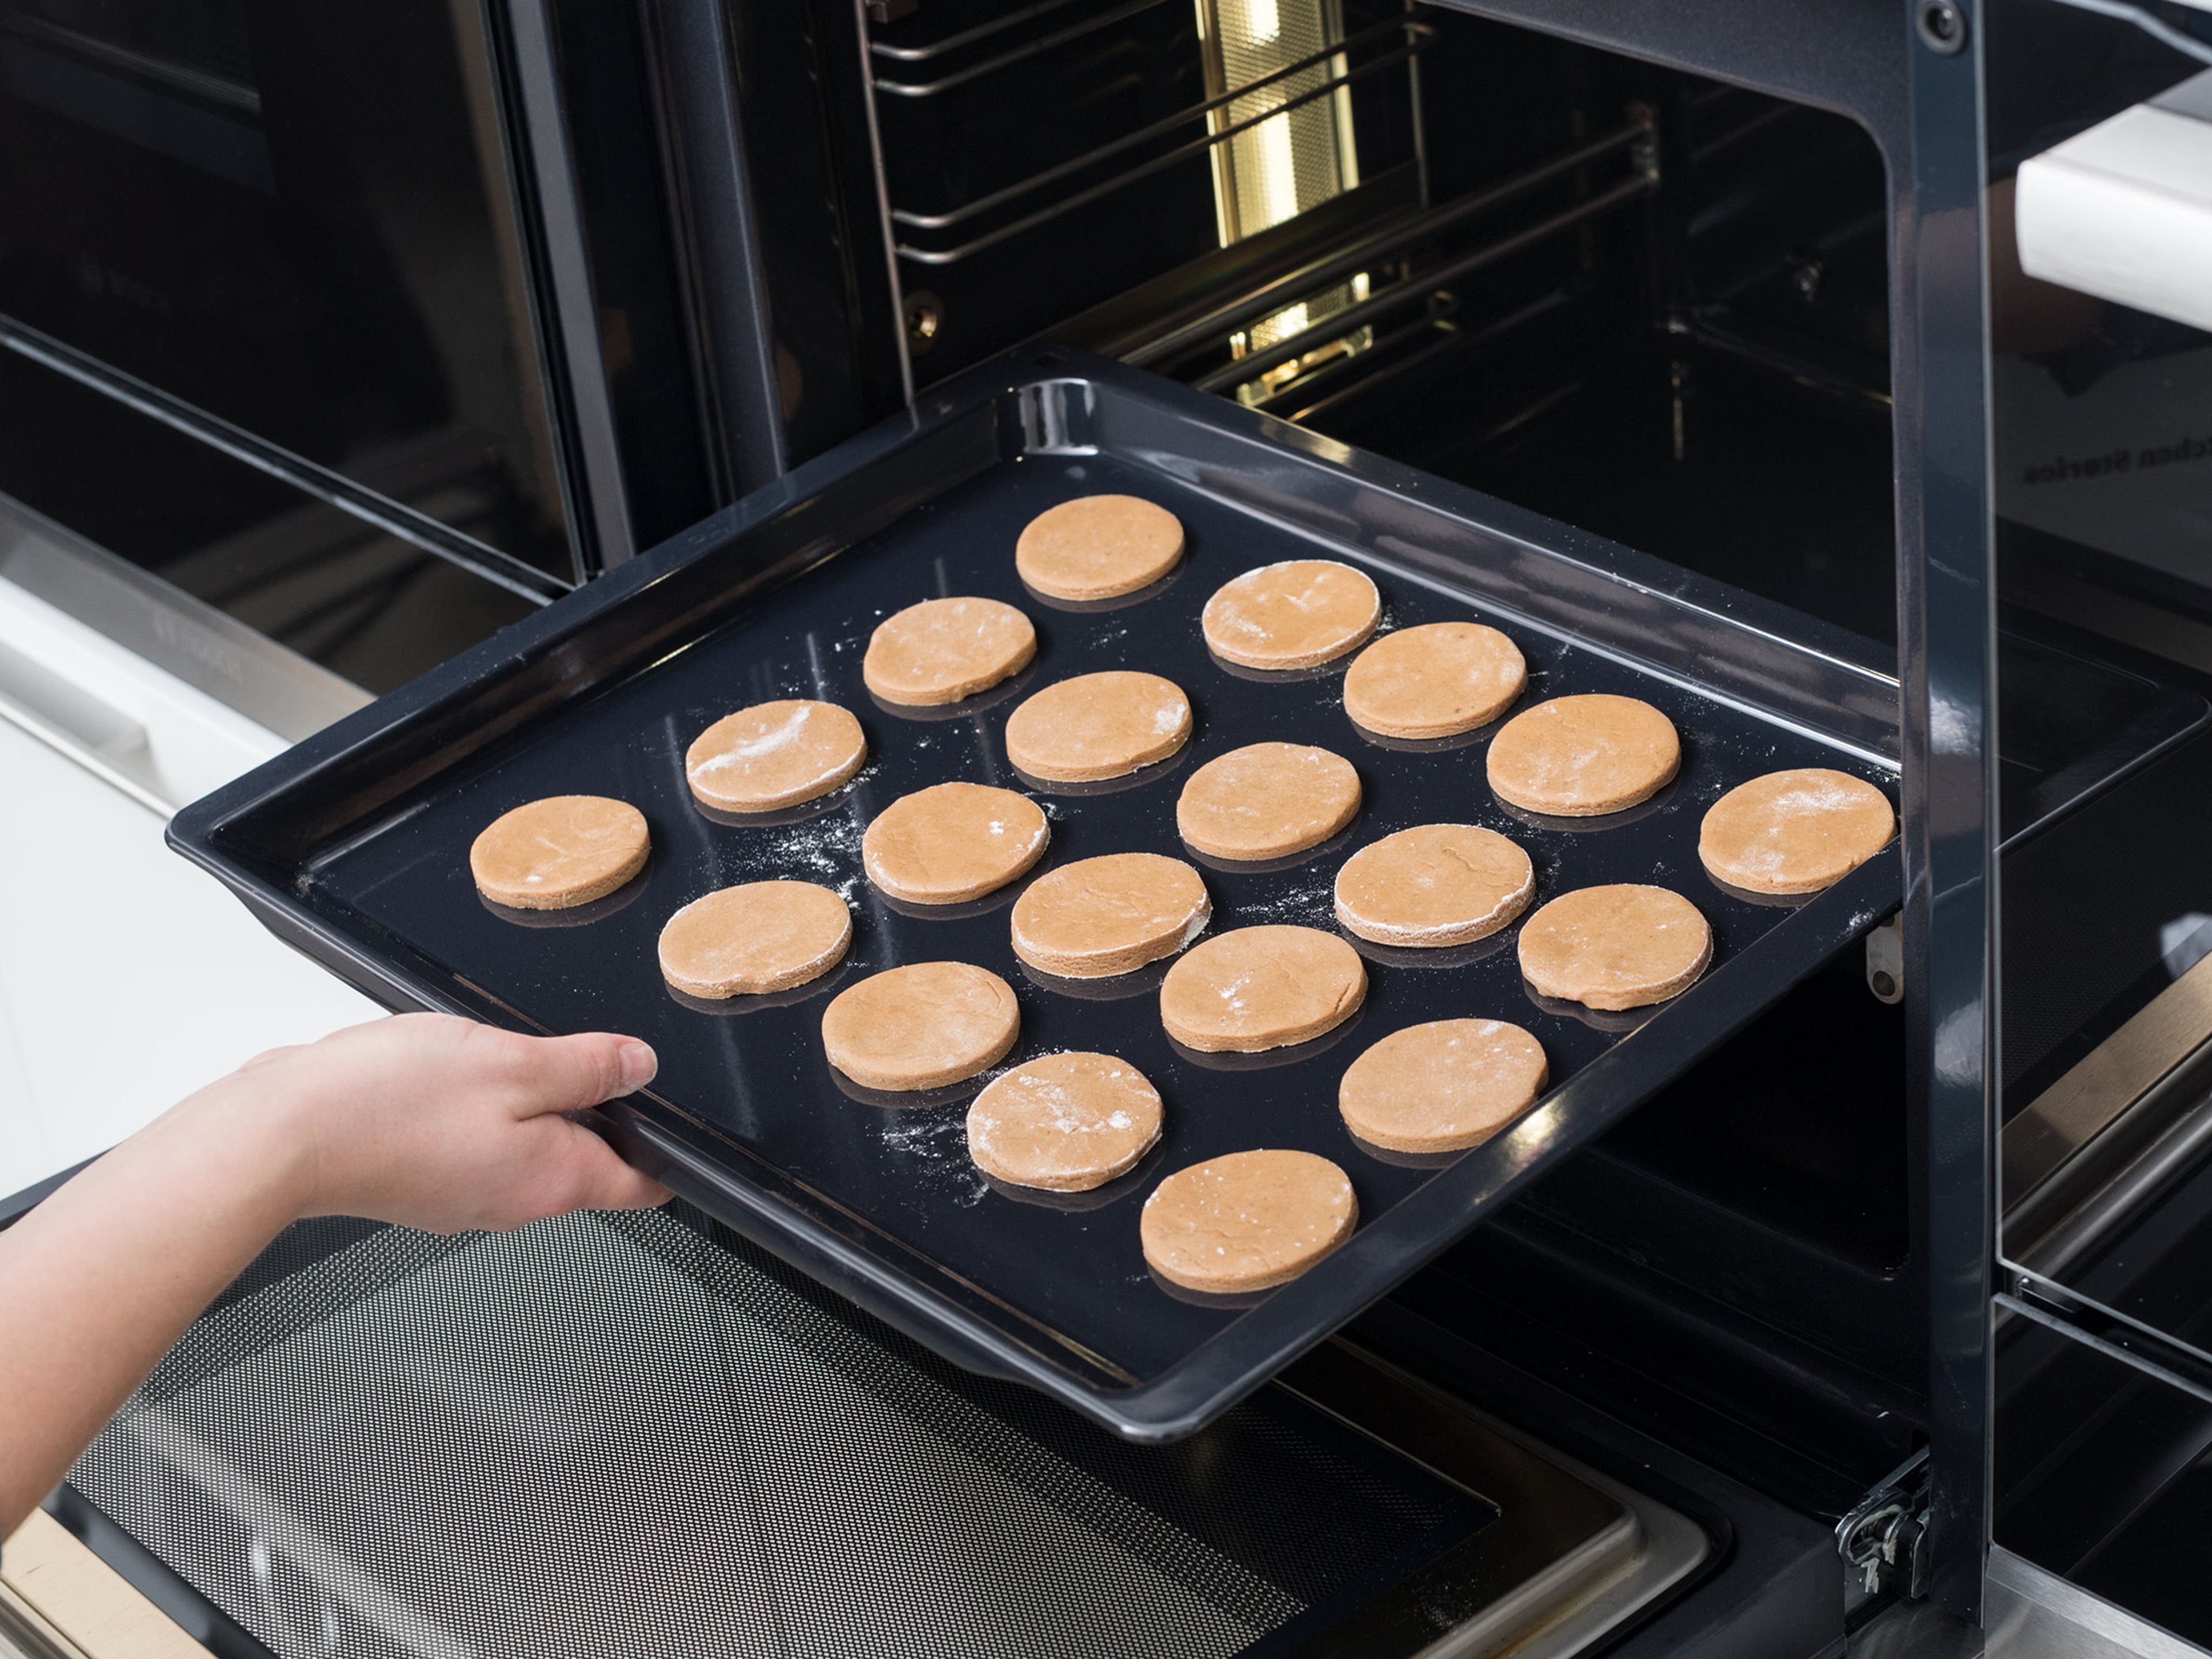 Preheat oven to 200°C/390°F. Roll out dough on a floured work surface. It should be 3/4-cm/1/3-in thick. Cut out cookies with a round cookie cutter. Transfer them onto a baking sheet and bake for approx. 8 – 10 min. Then let cool completely.